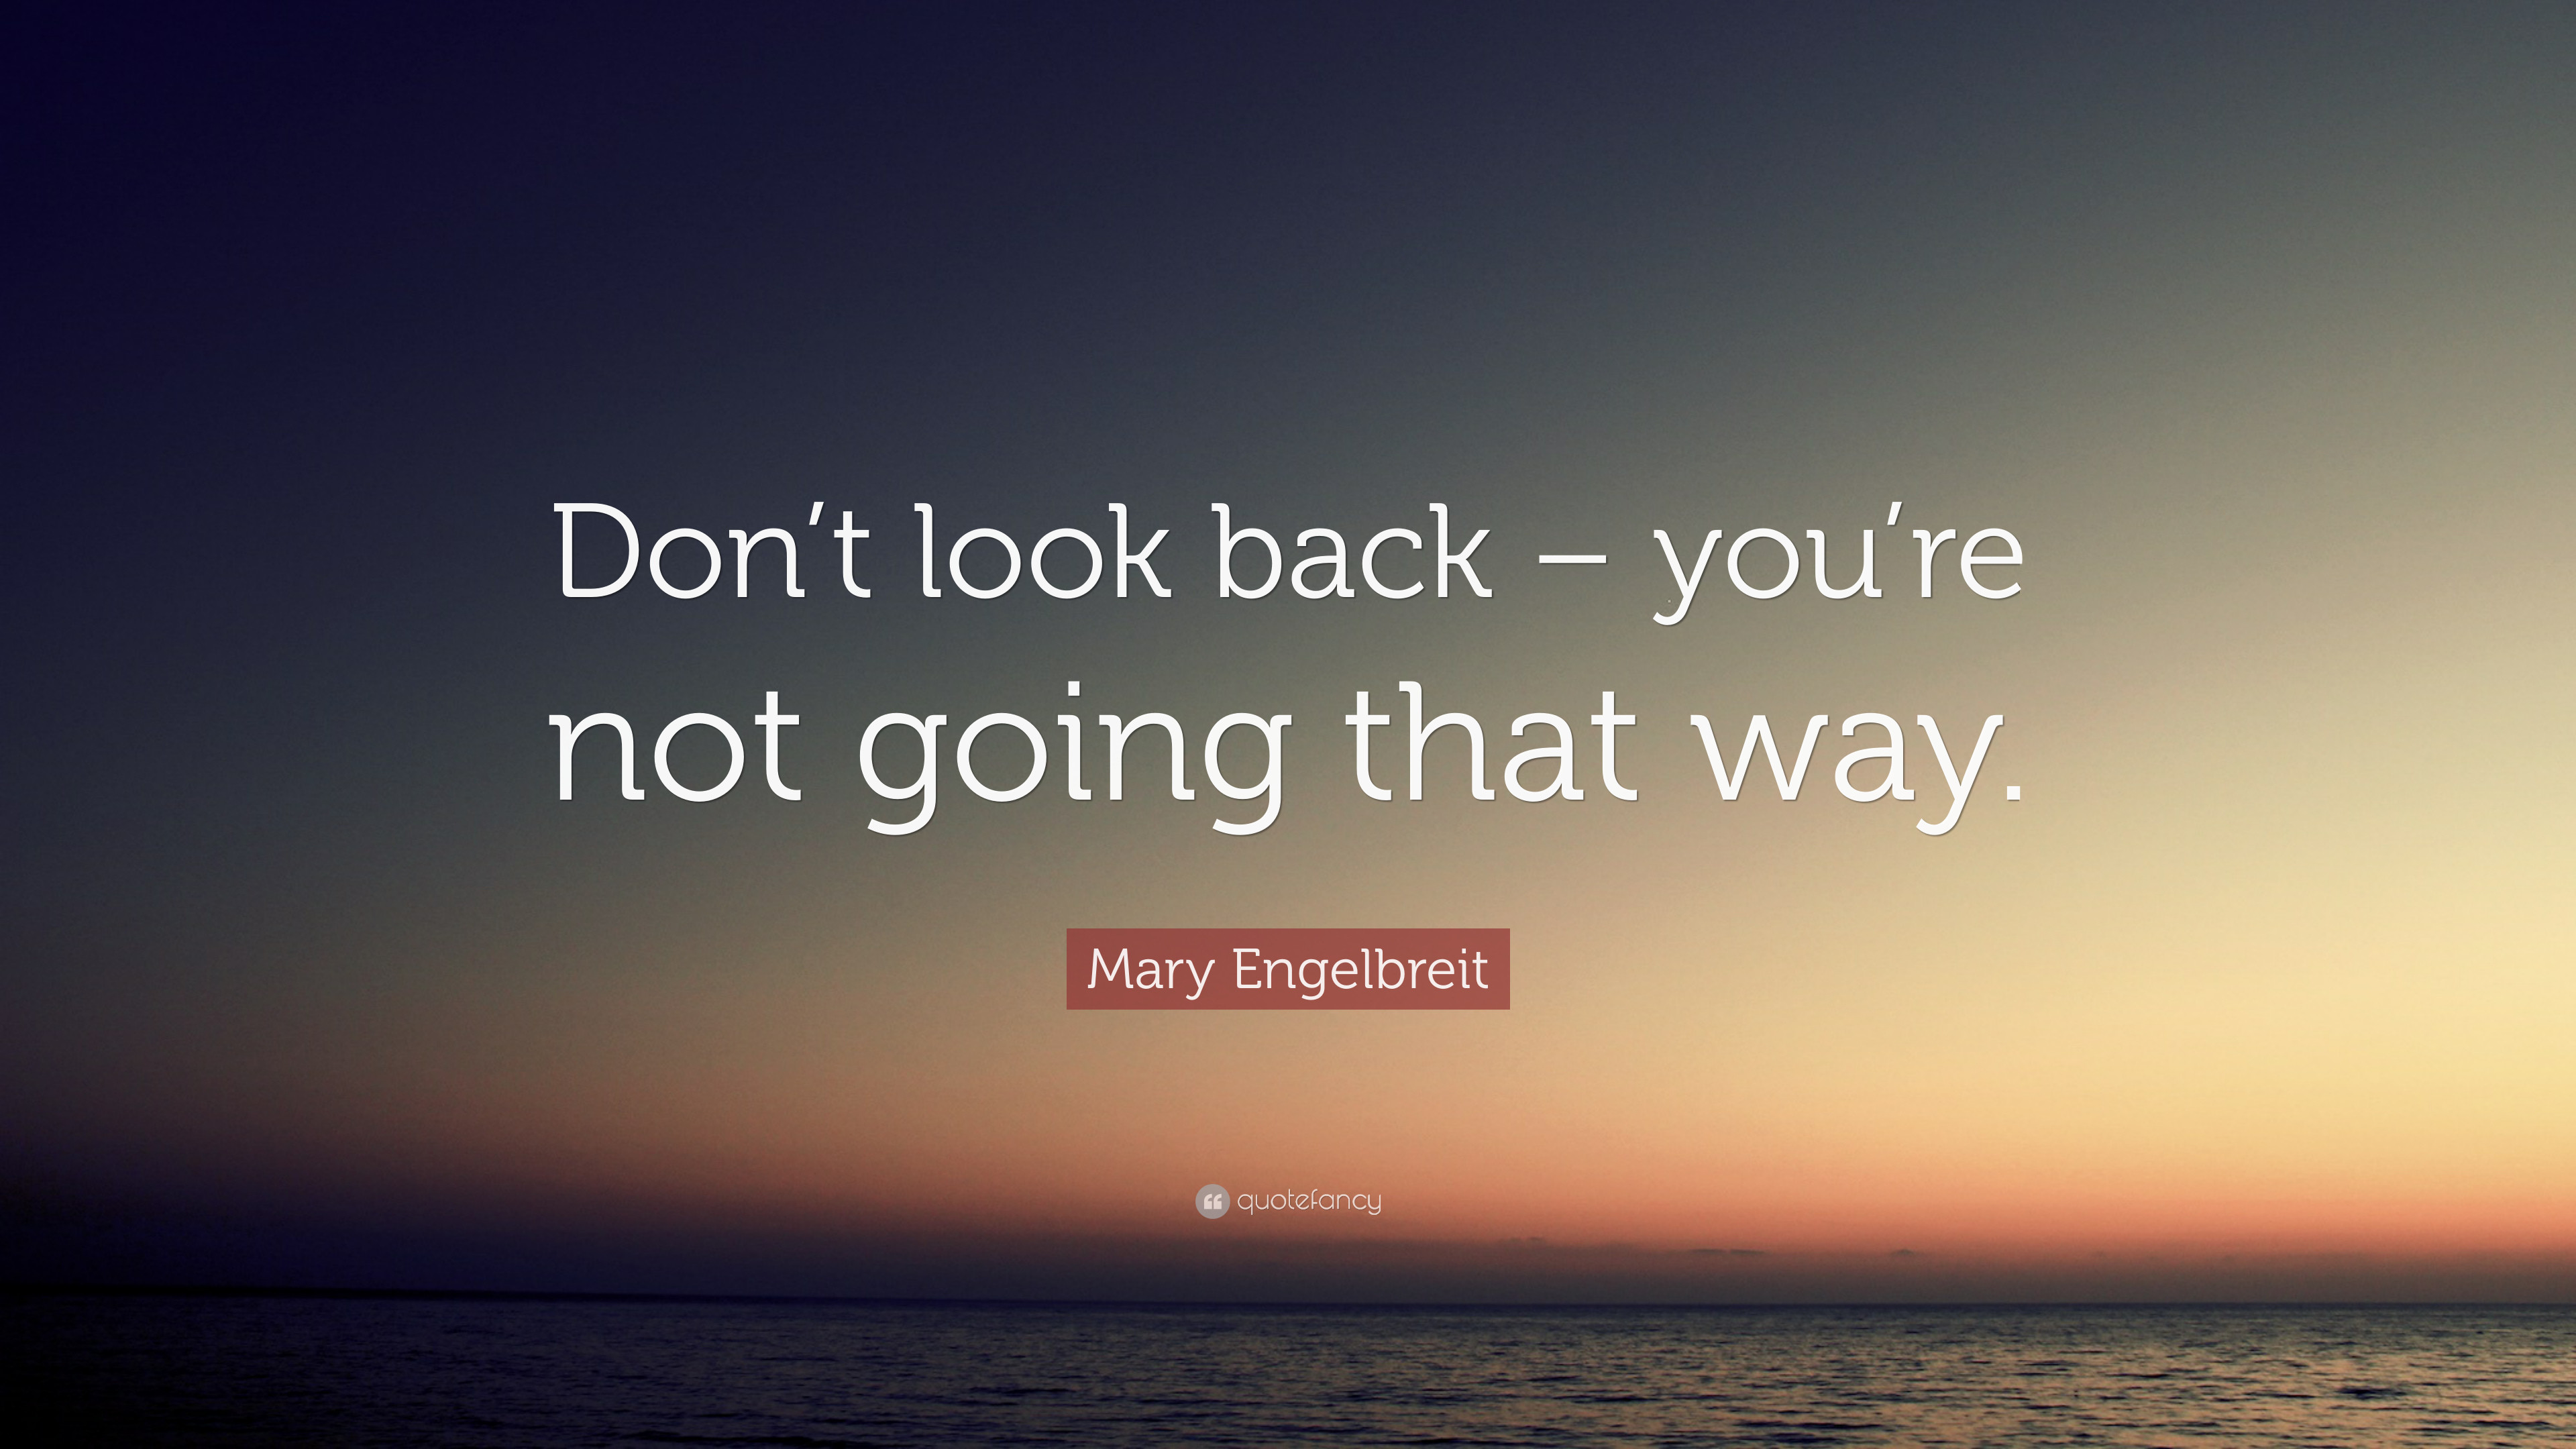 3840x2160 Mary Engelbreit Quote: “Don't look back – you're not going ... wallpaper ...